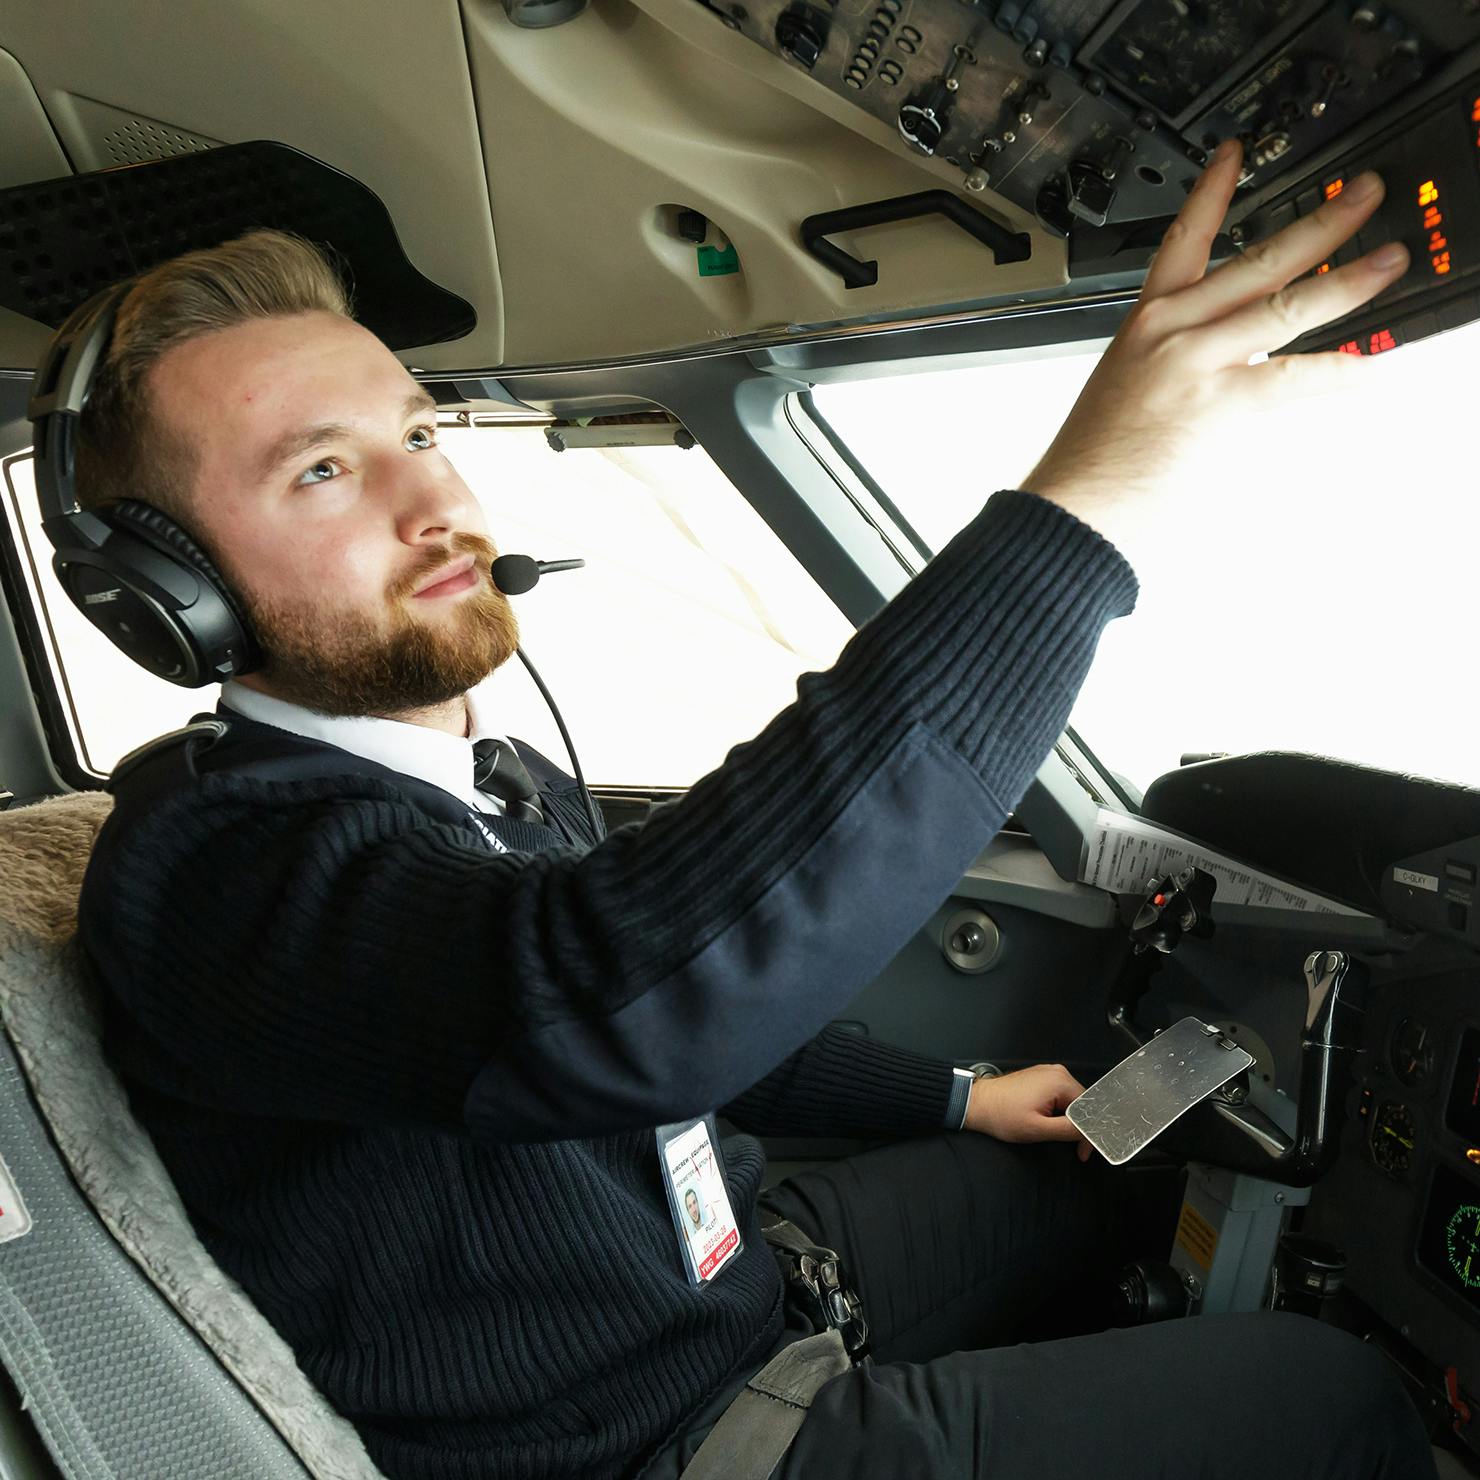 Pilot turning on controls in the cockpit of an airplane.